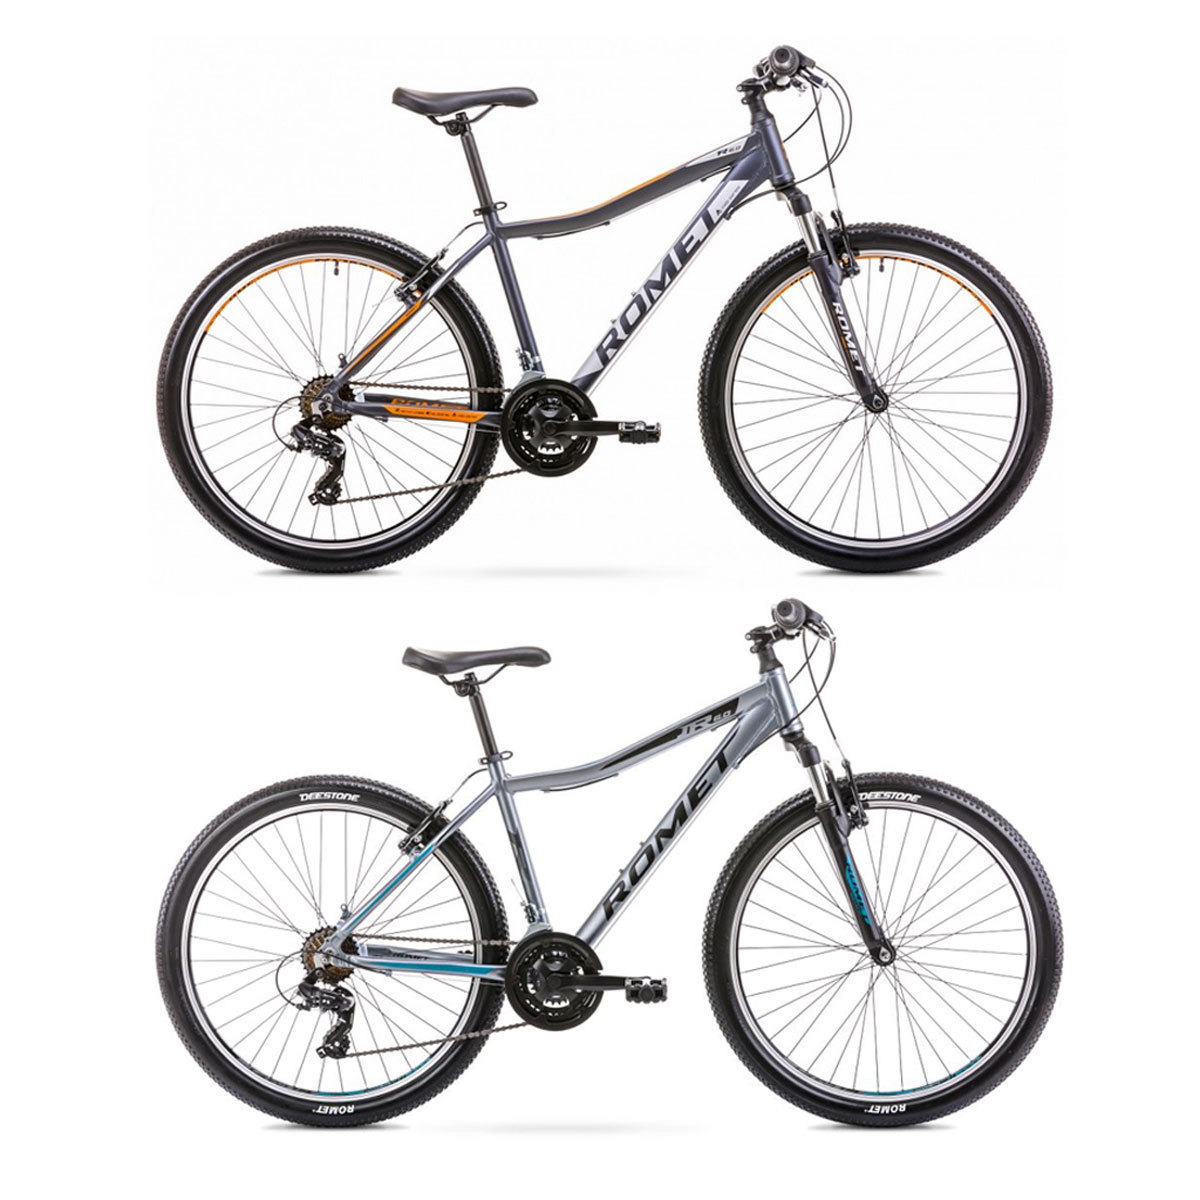 Romet Rambler R6 JR Hardtail Mountain Bike in 2 Colours and Sizes